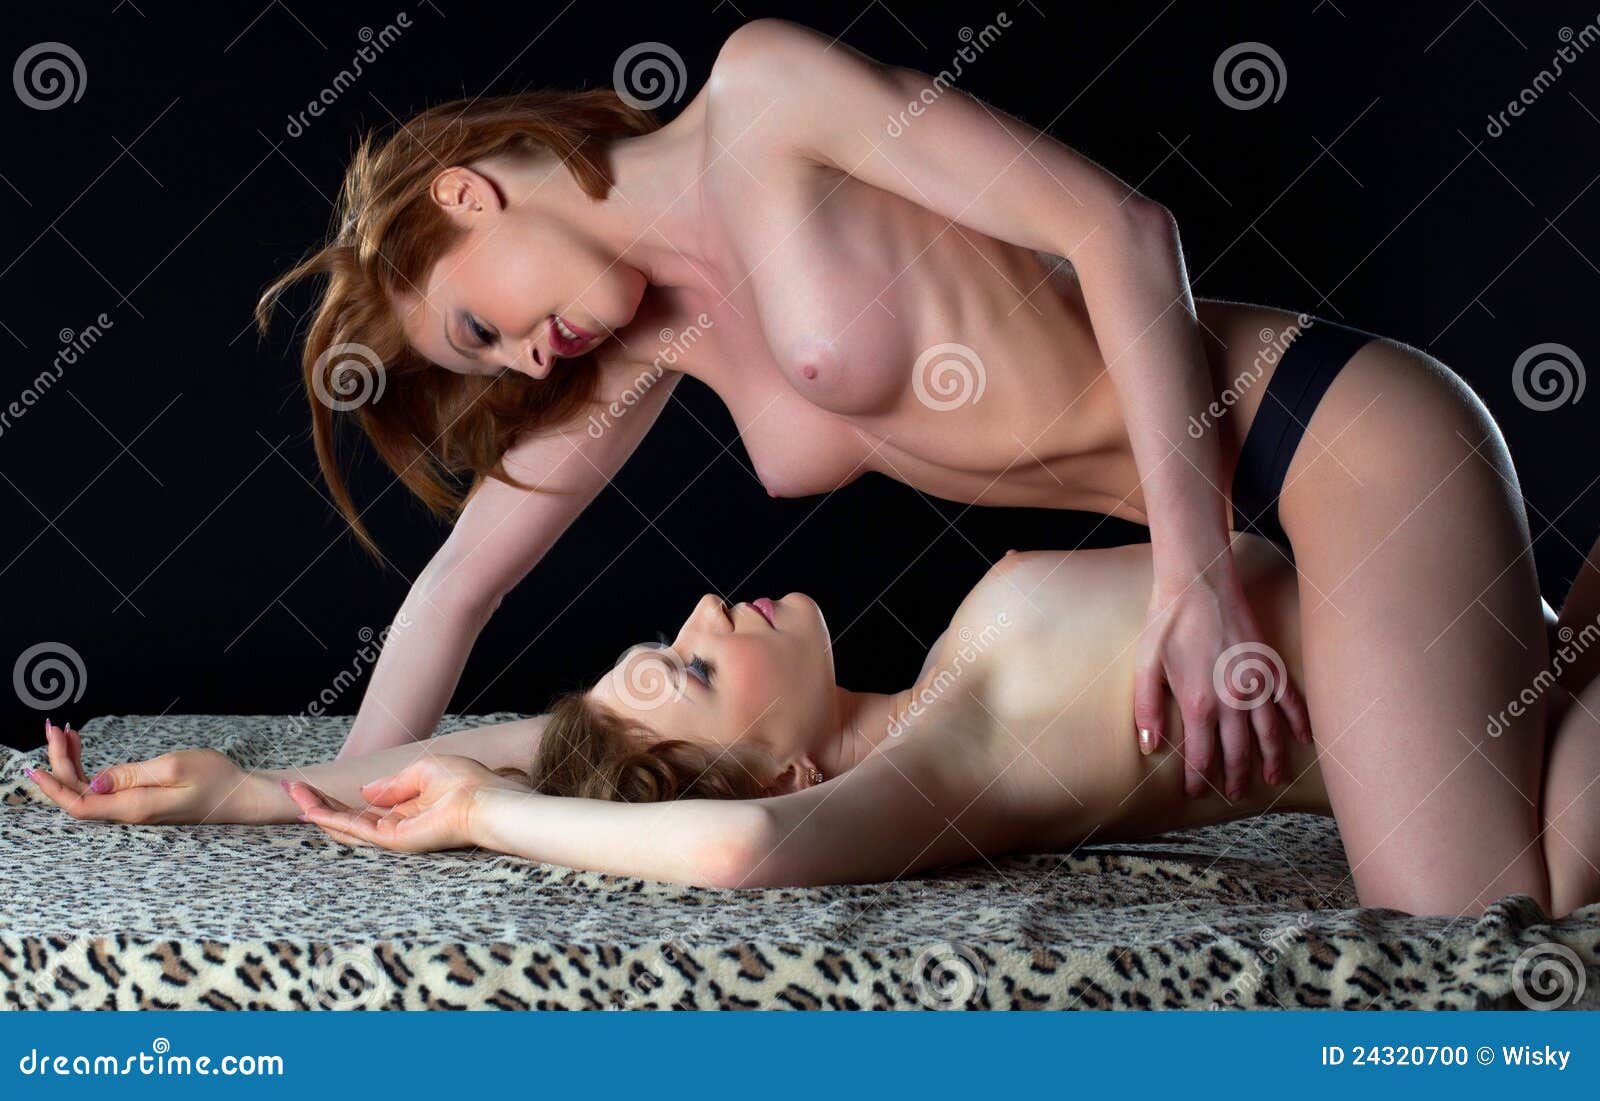 Lesbian Couples Posing Nude - Two Girl Posing Topless in Bed - Lesbian Couple Stock Photo - Image of  couple, lady: 24320700